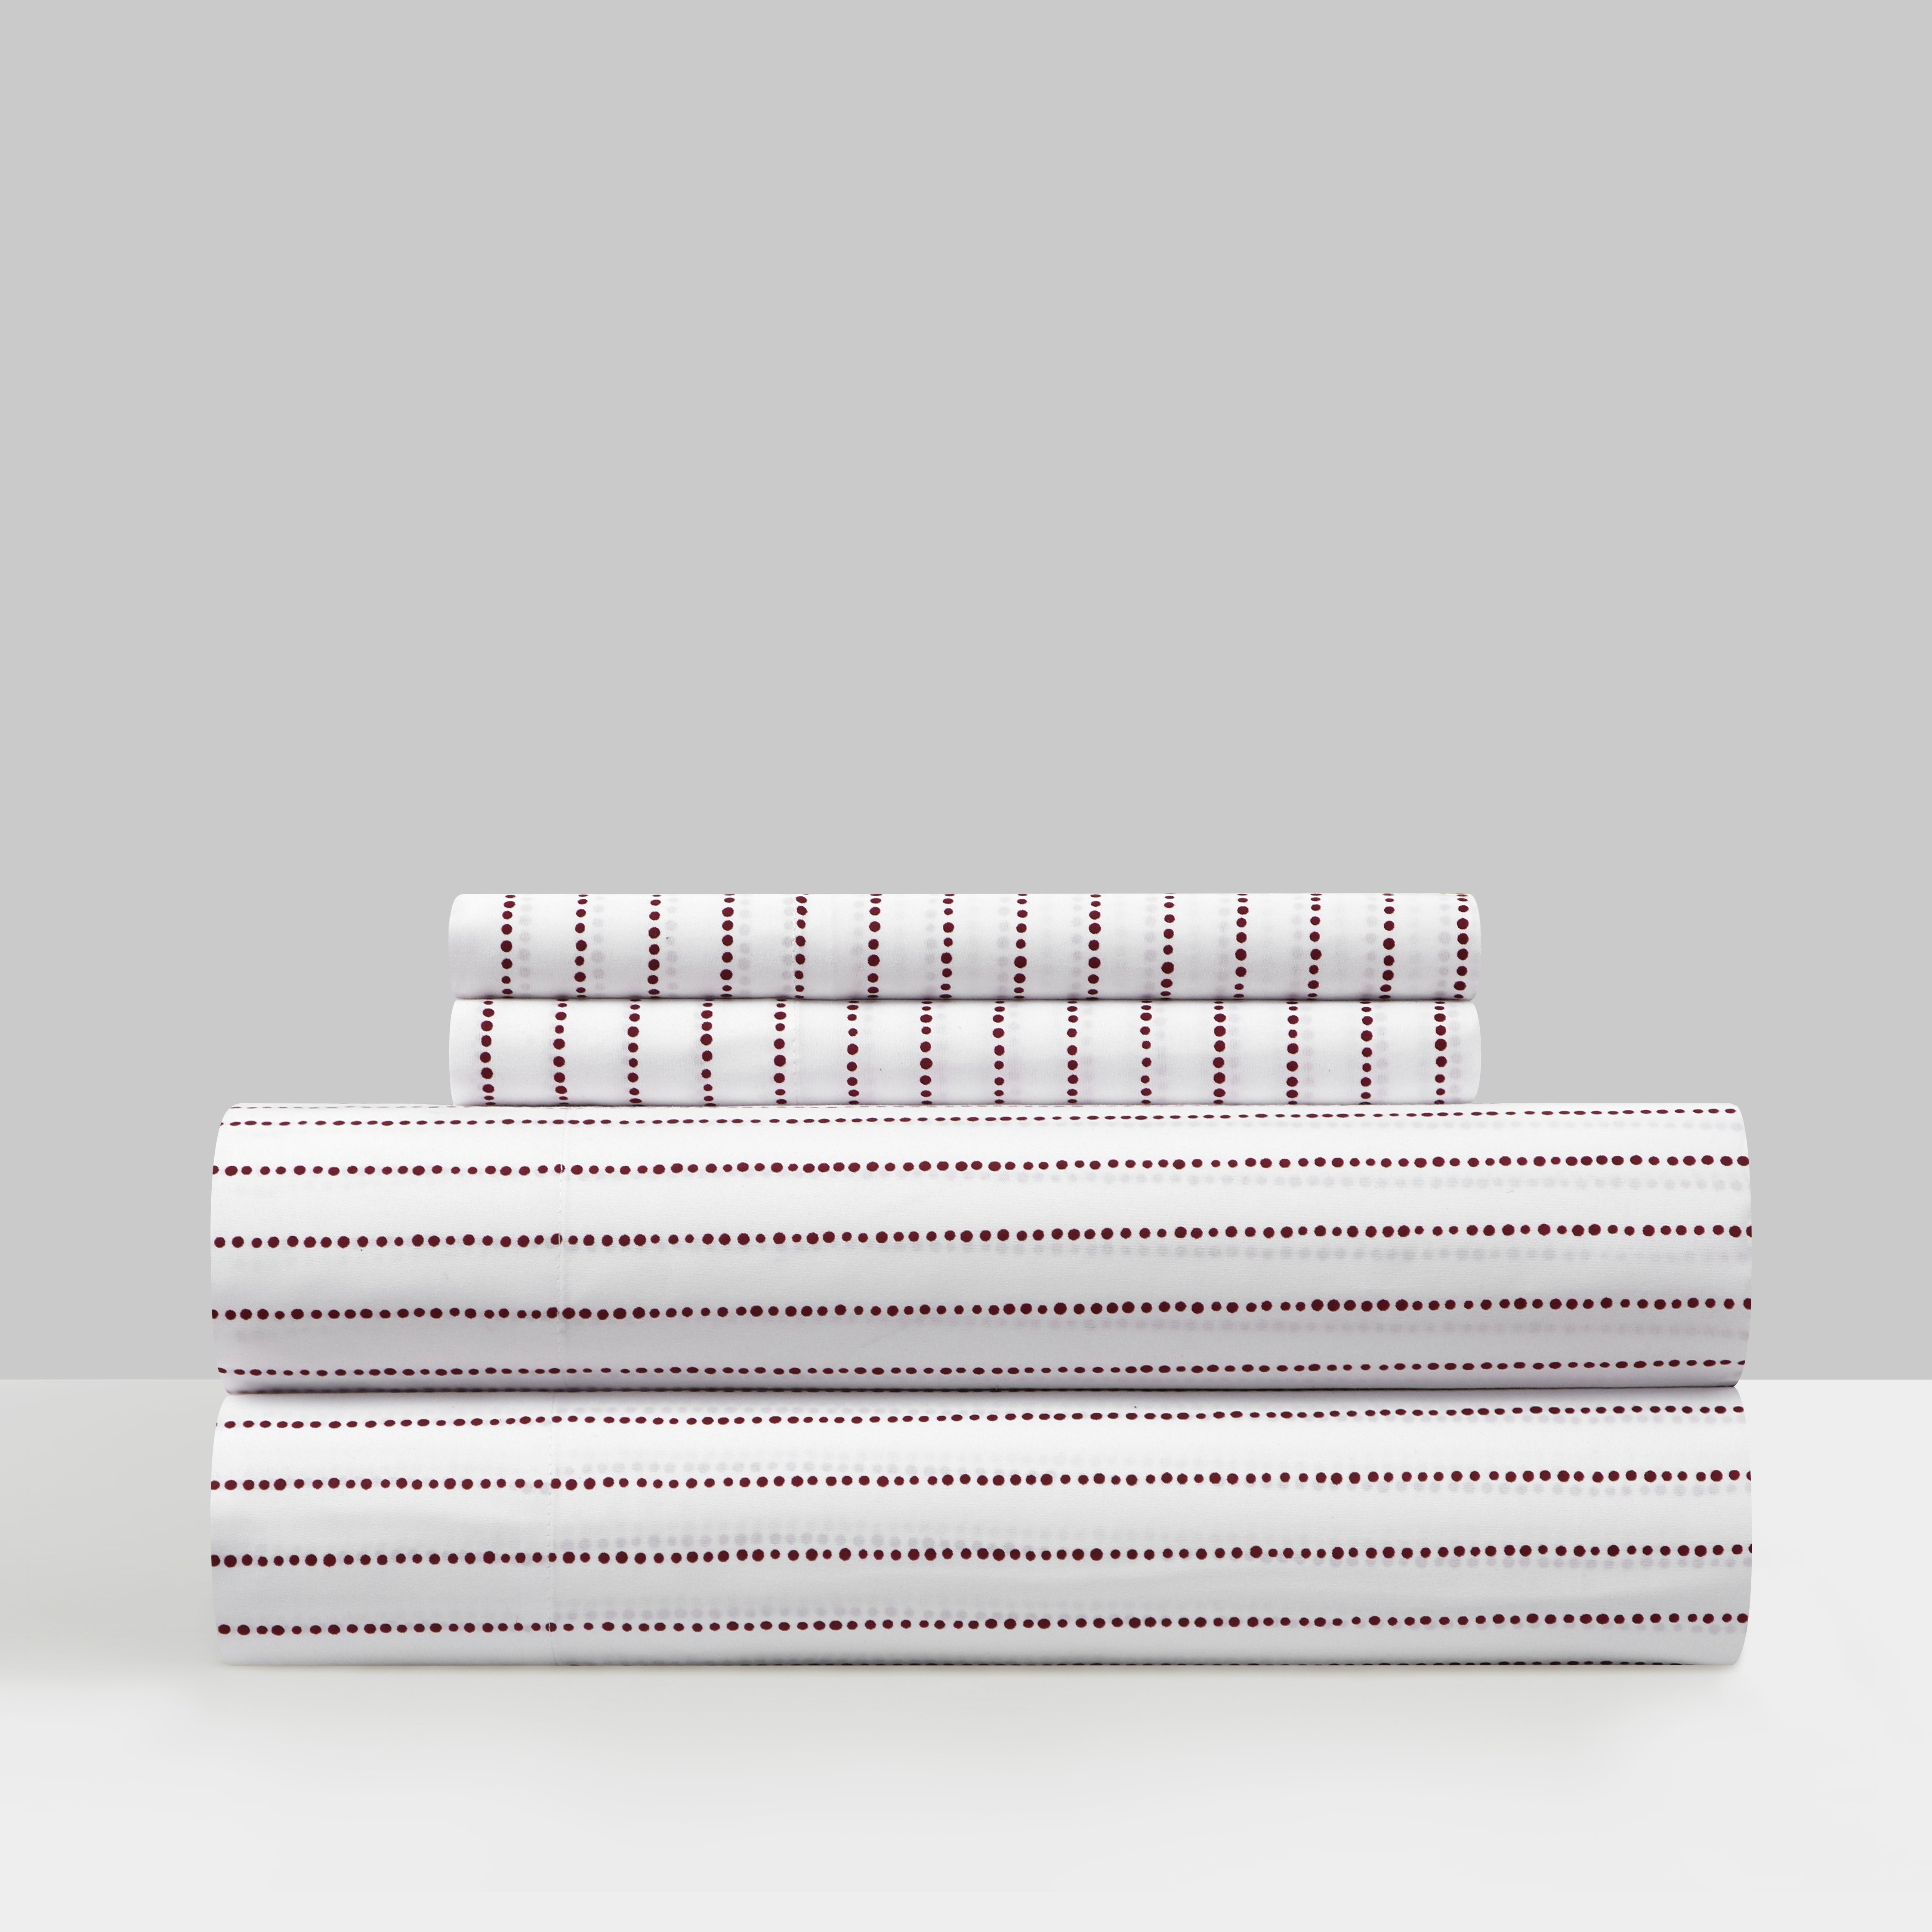 Caley 3 Or 4 Piece Sheet Set Solid White With Dot Striped Pattern Print Design - Wine Red, Queen